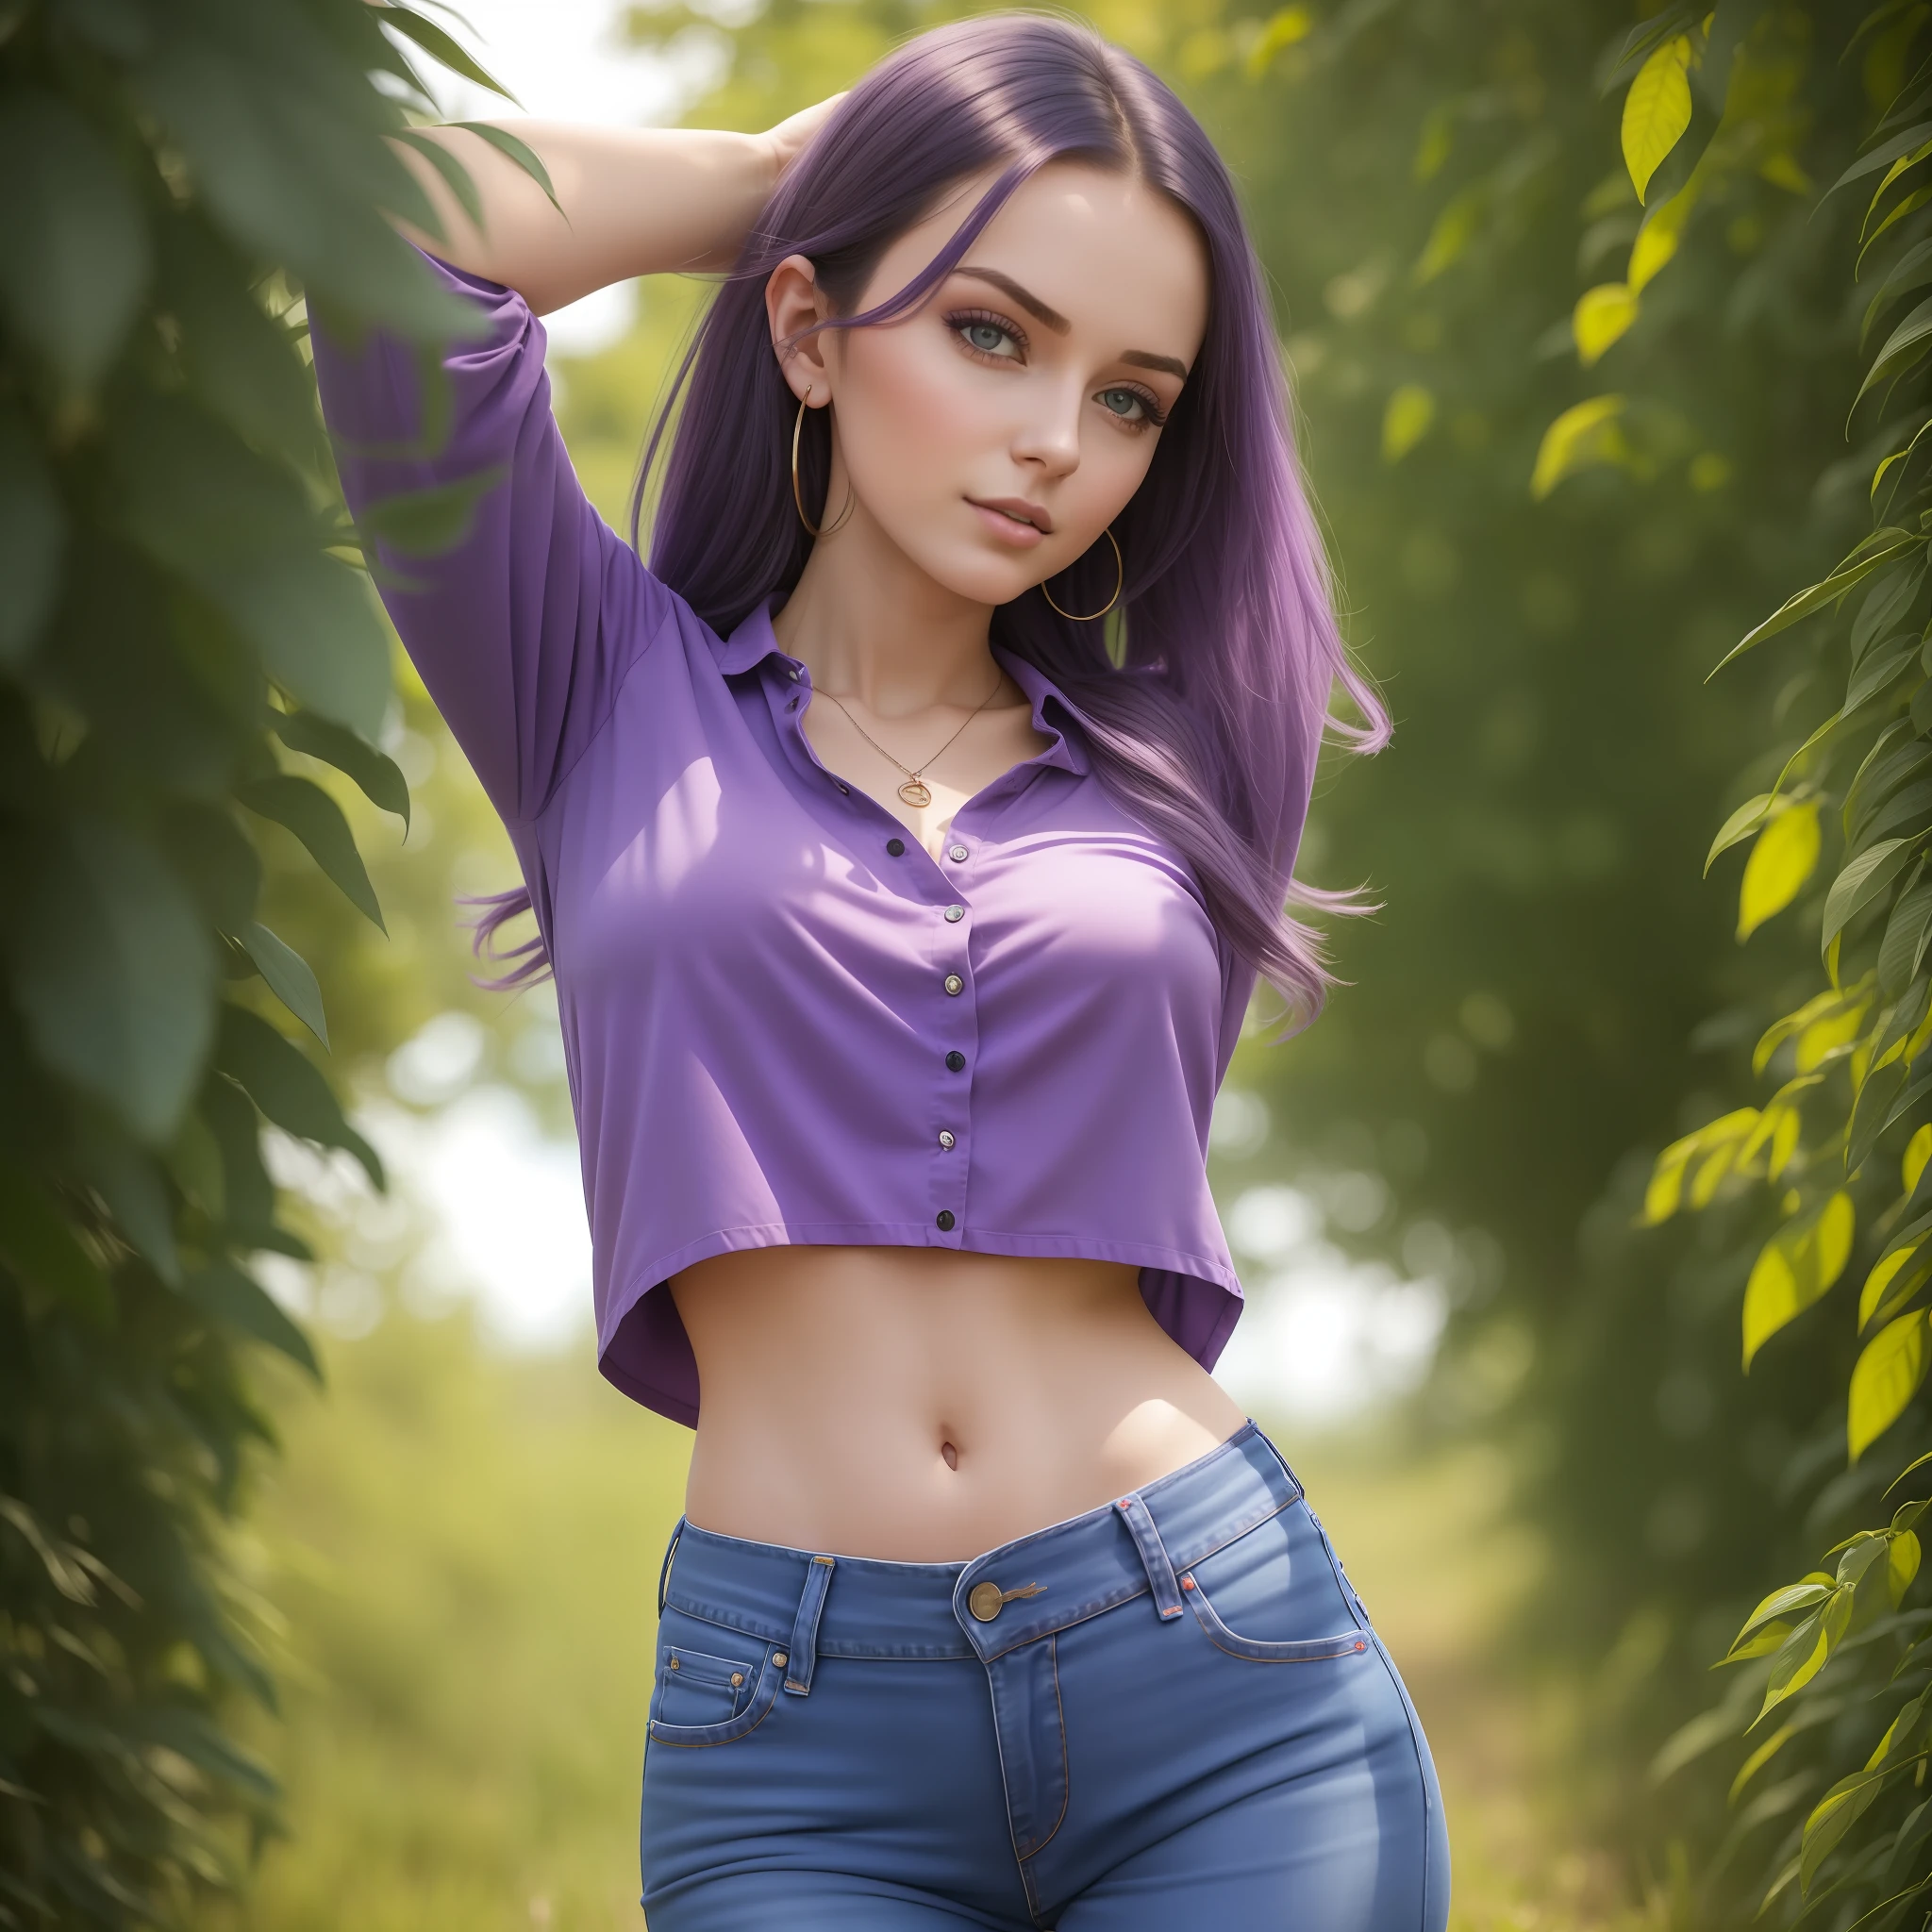 A Caucasian Teenage Girl In Jeans And A Purple Shirt Strikes A Silly Pose  High-Res Stock Photo - Getty Images